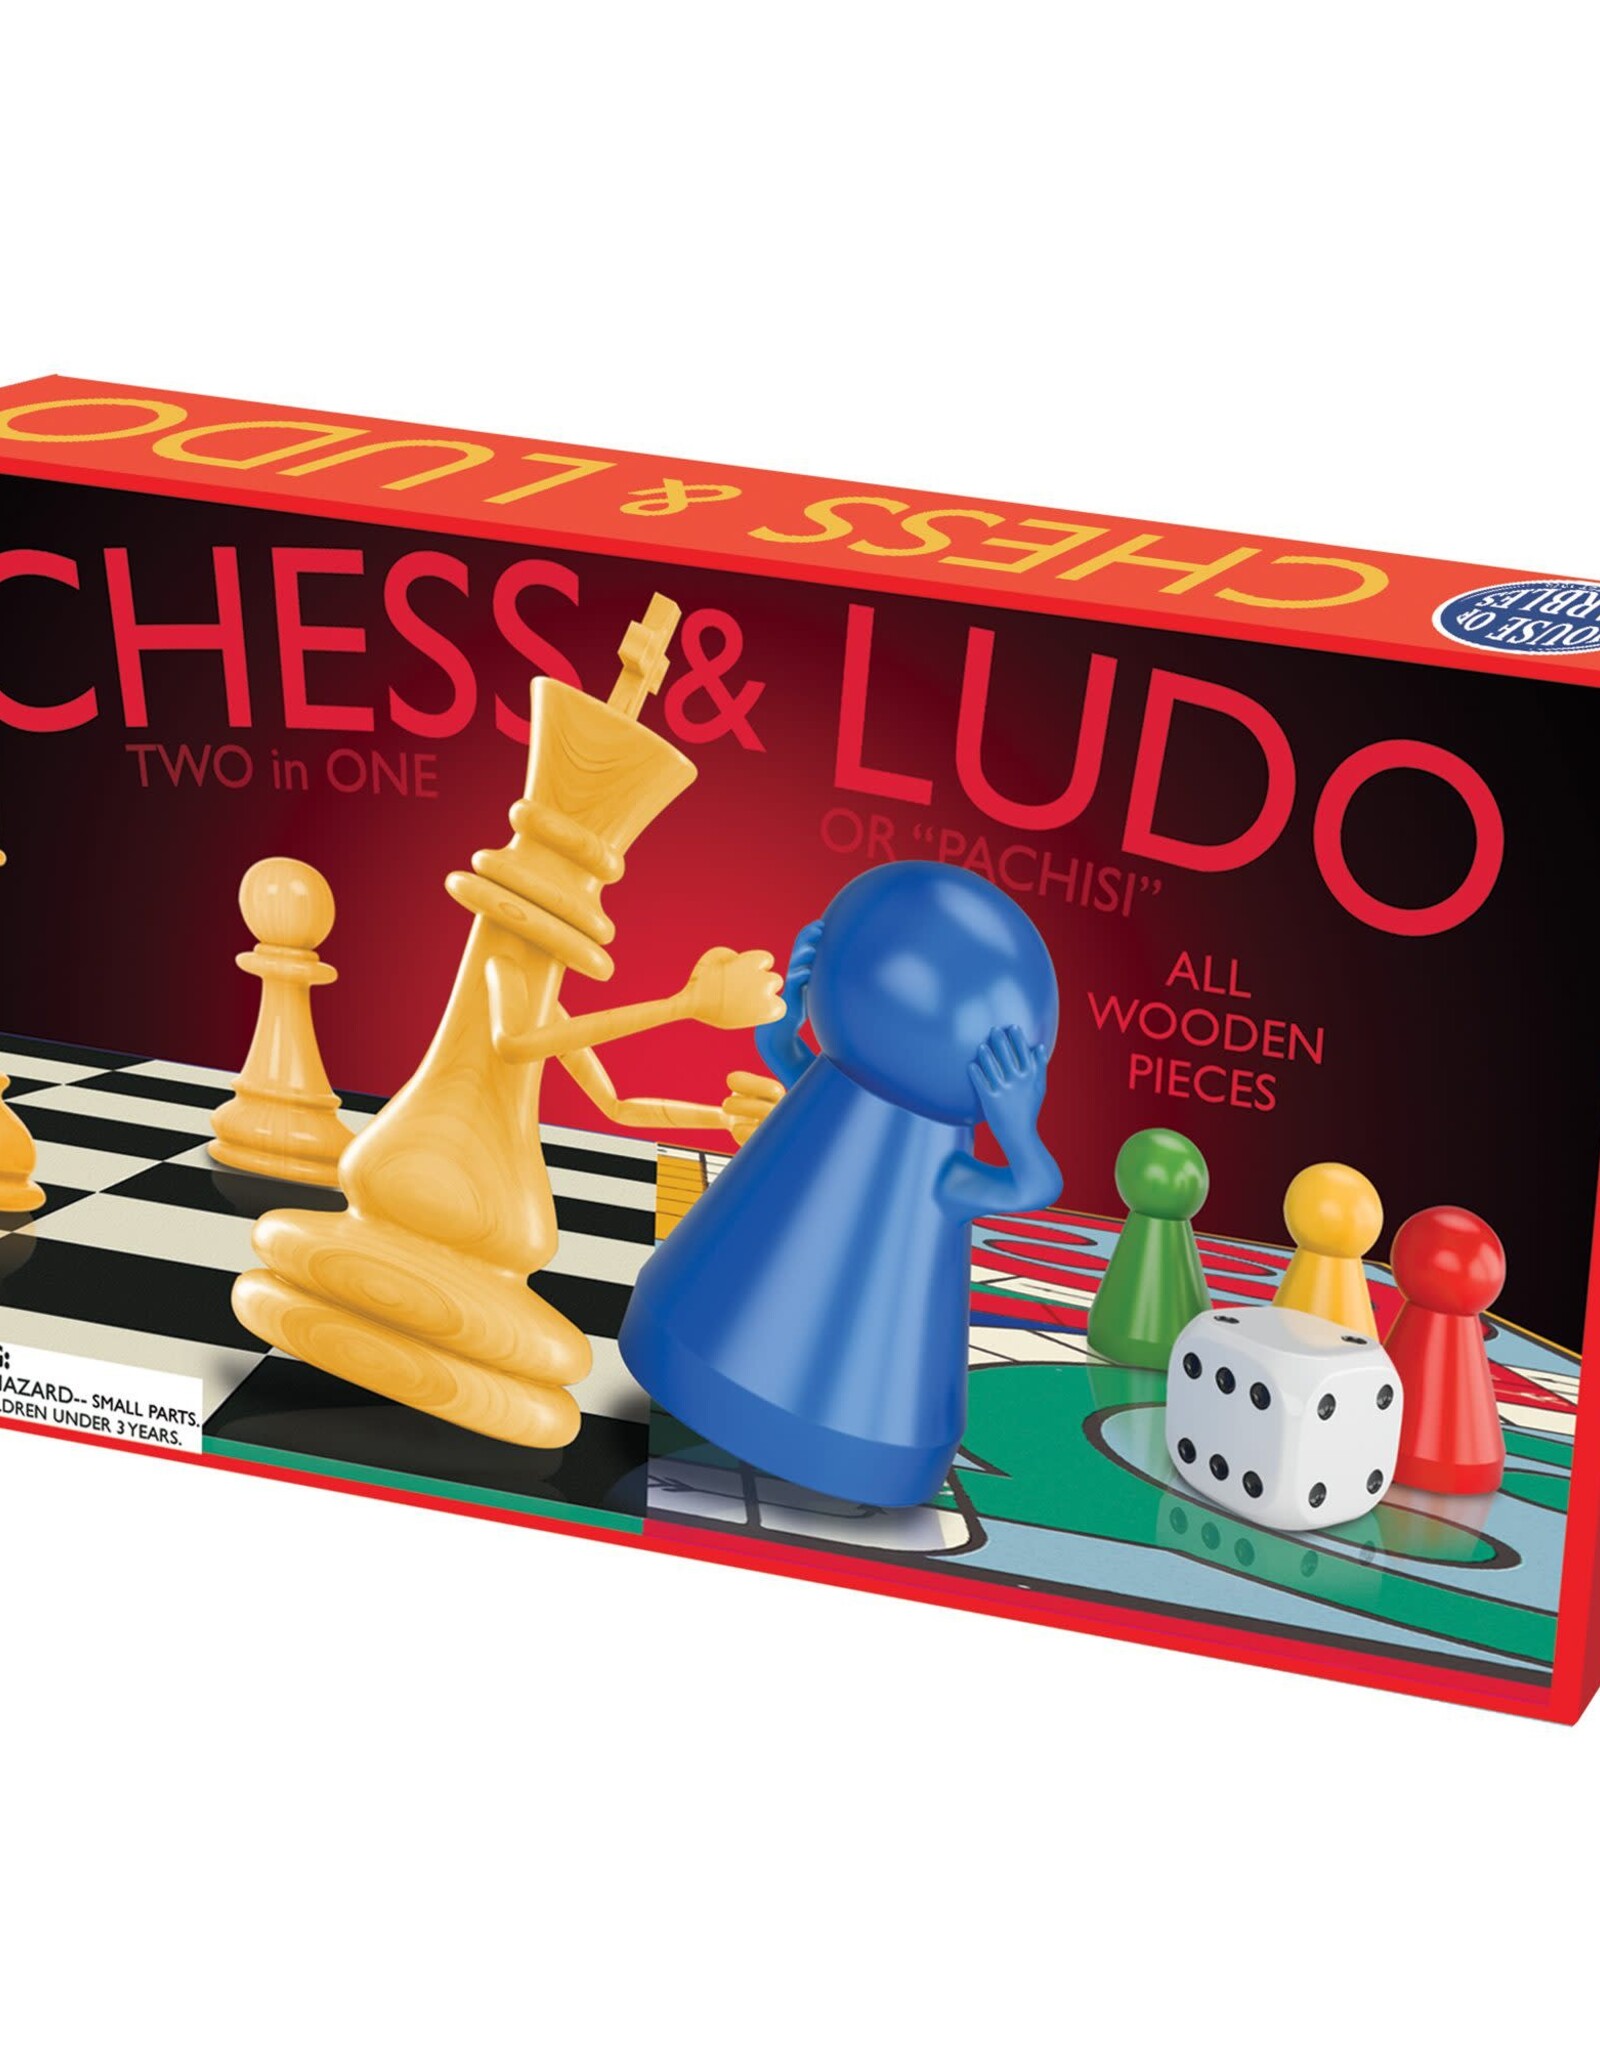 House of Marbles Chess & Ludo  Game